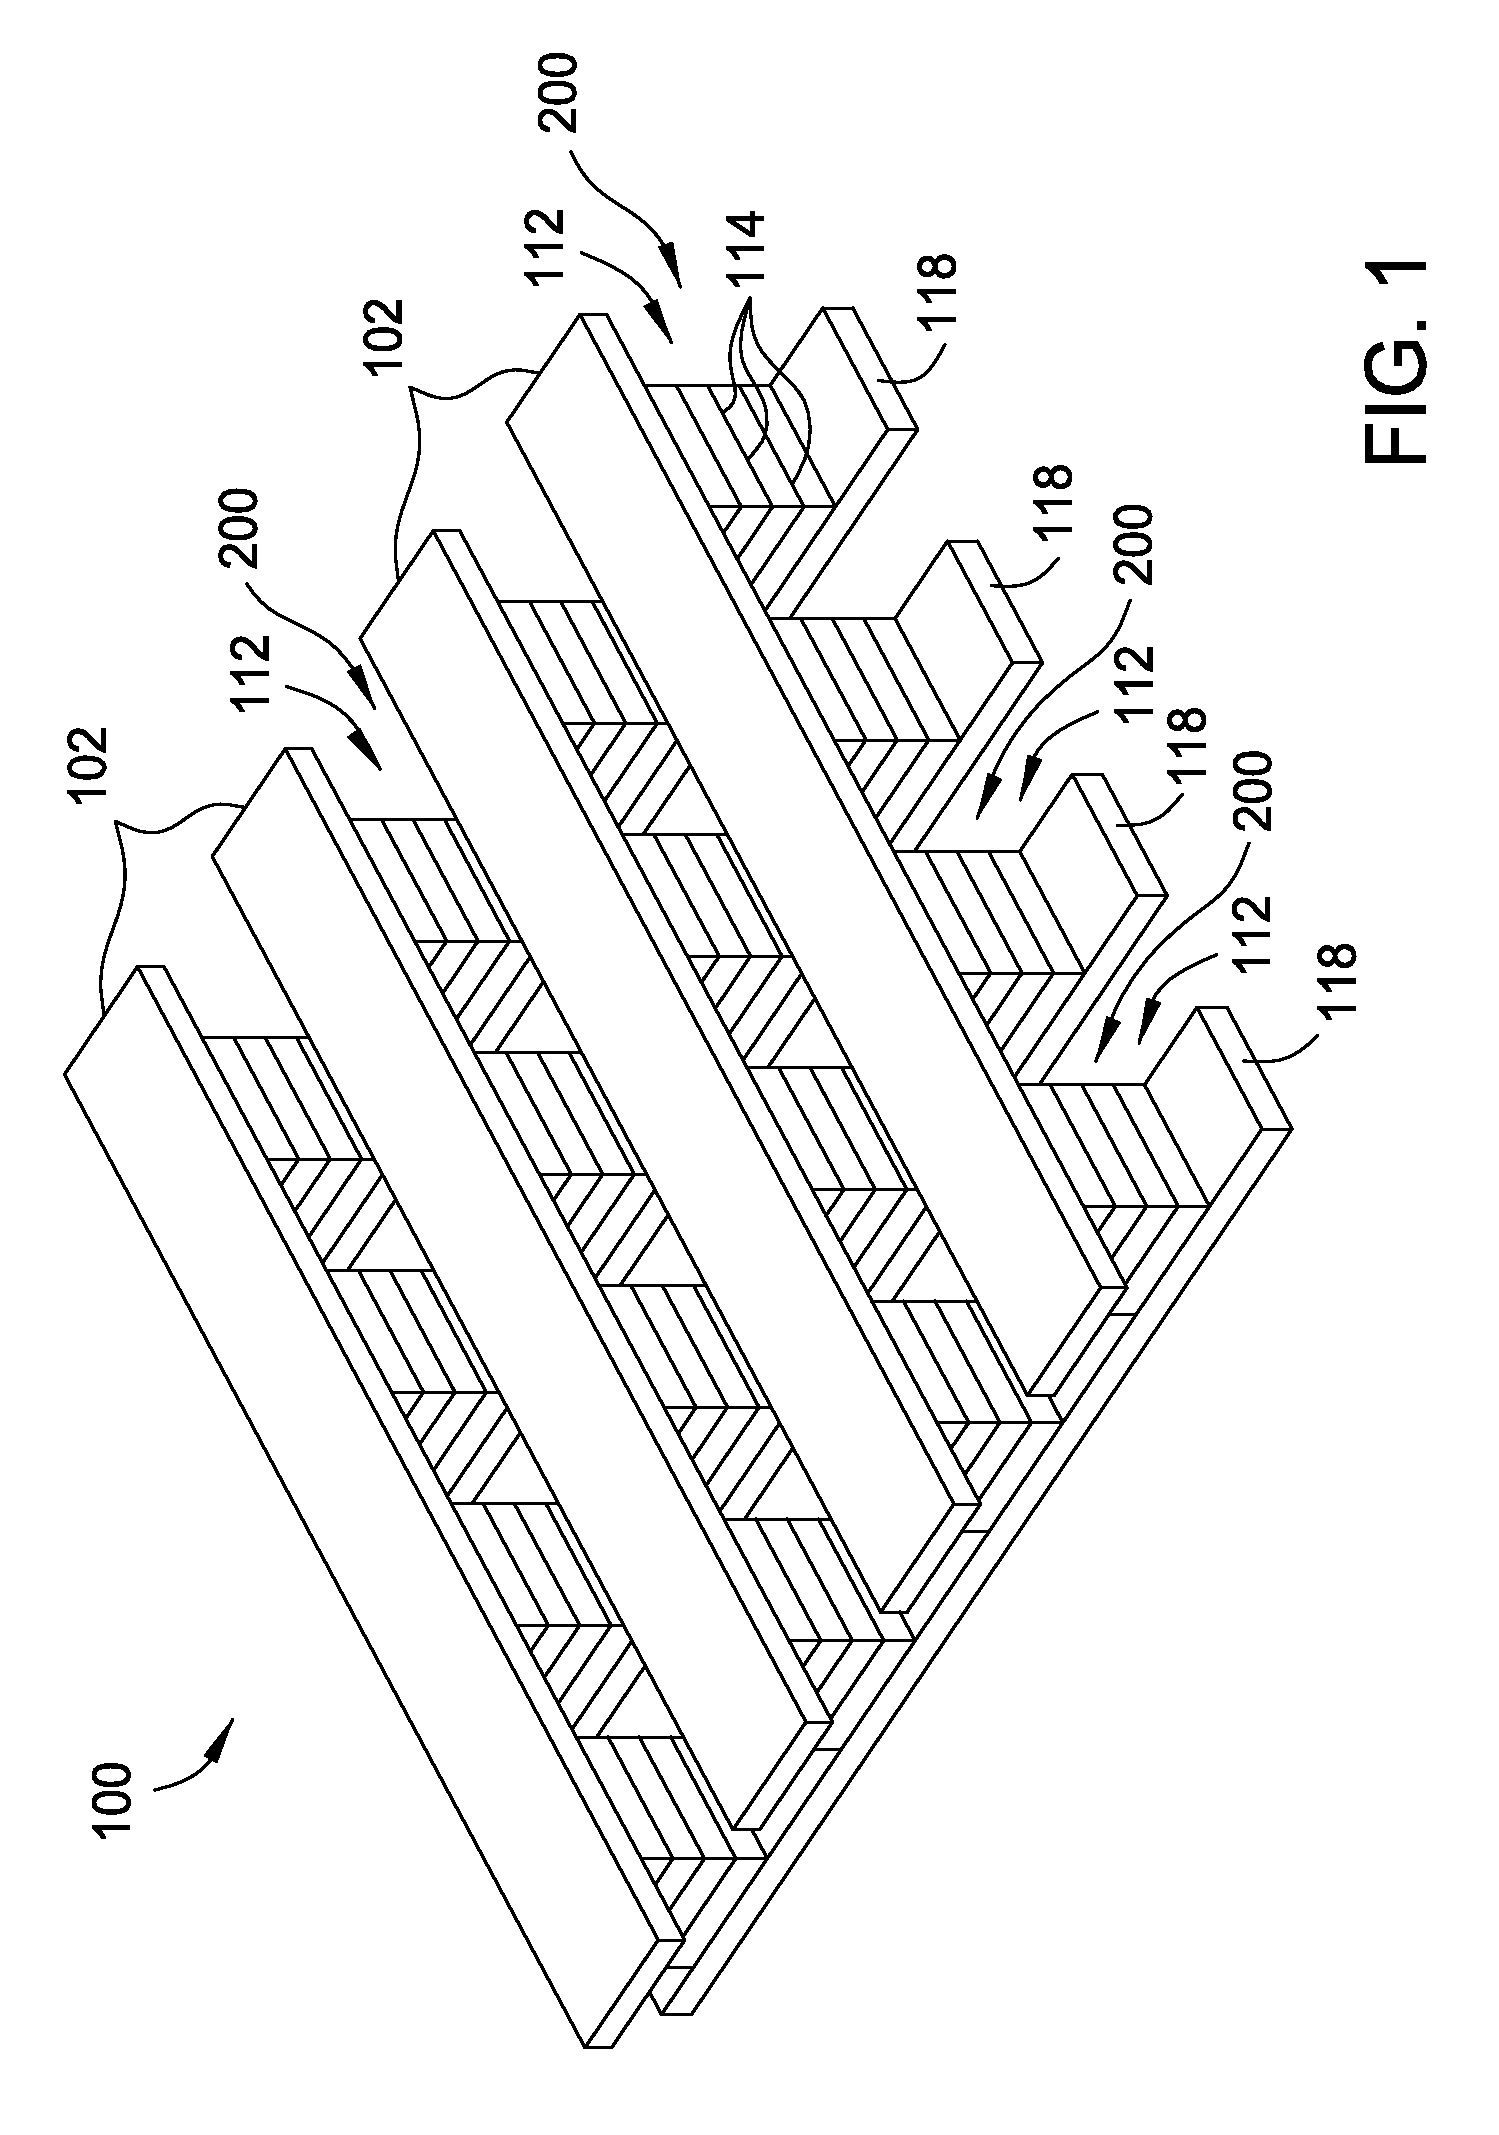 Nonvolatile memory device having a current limiting element